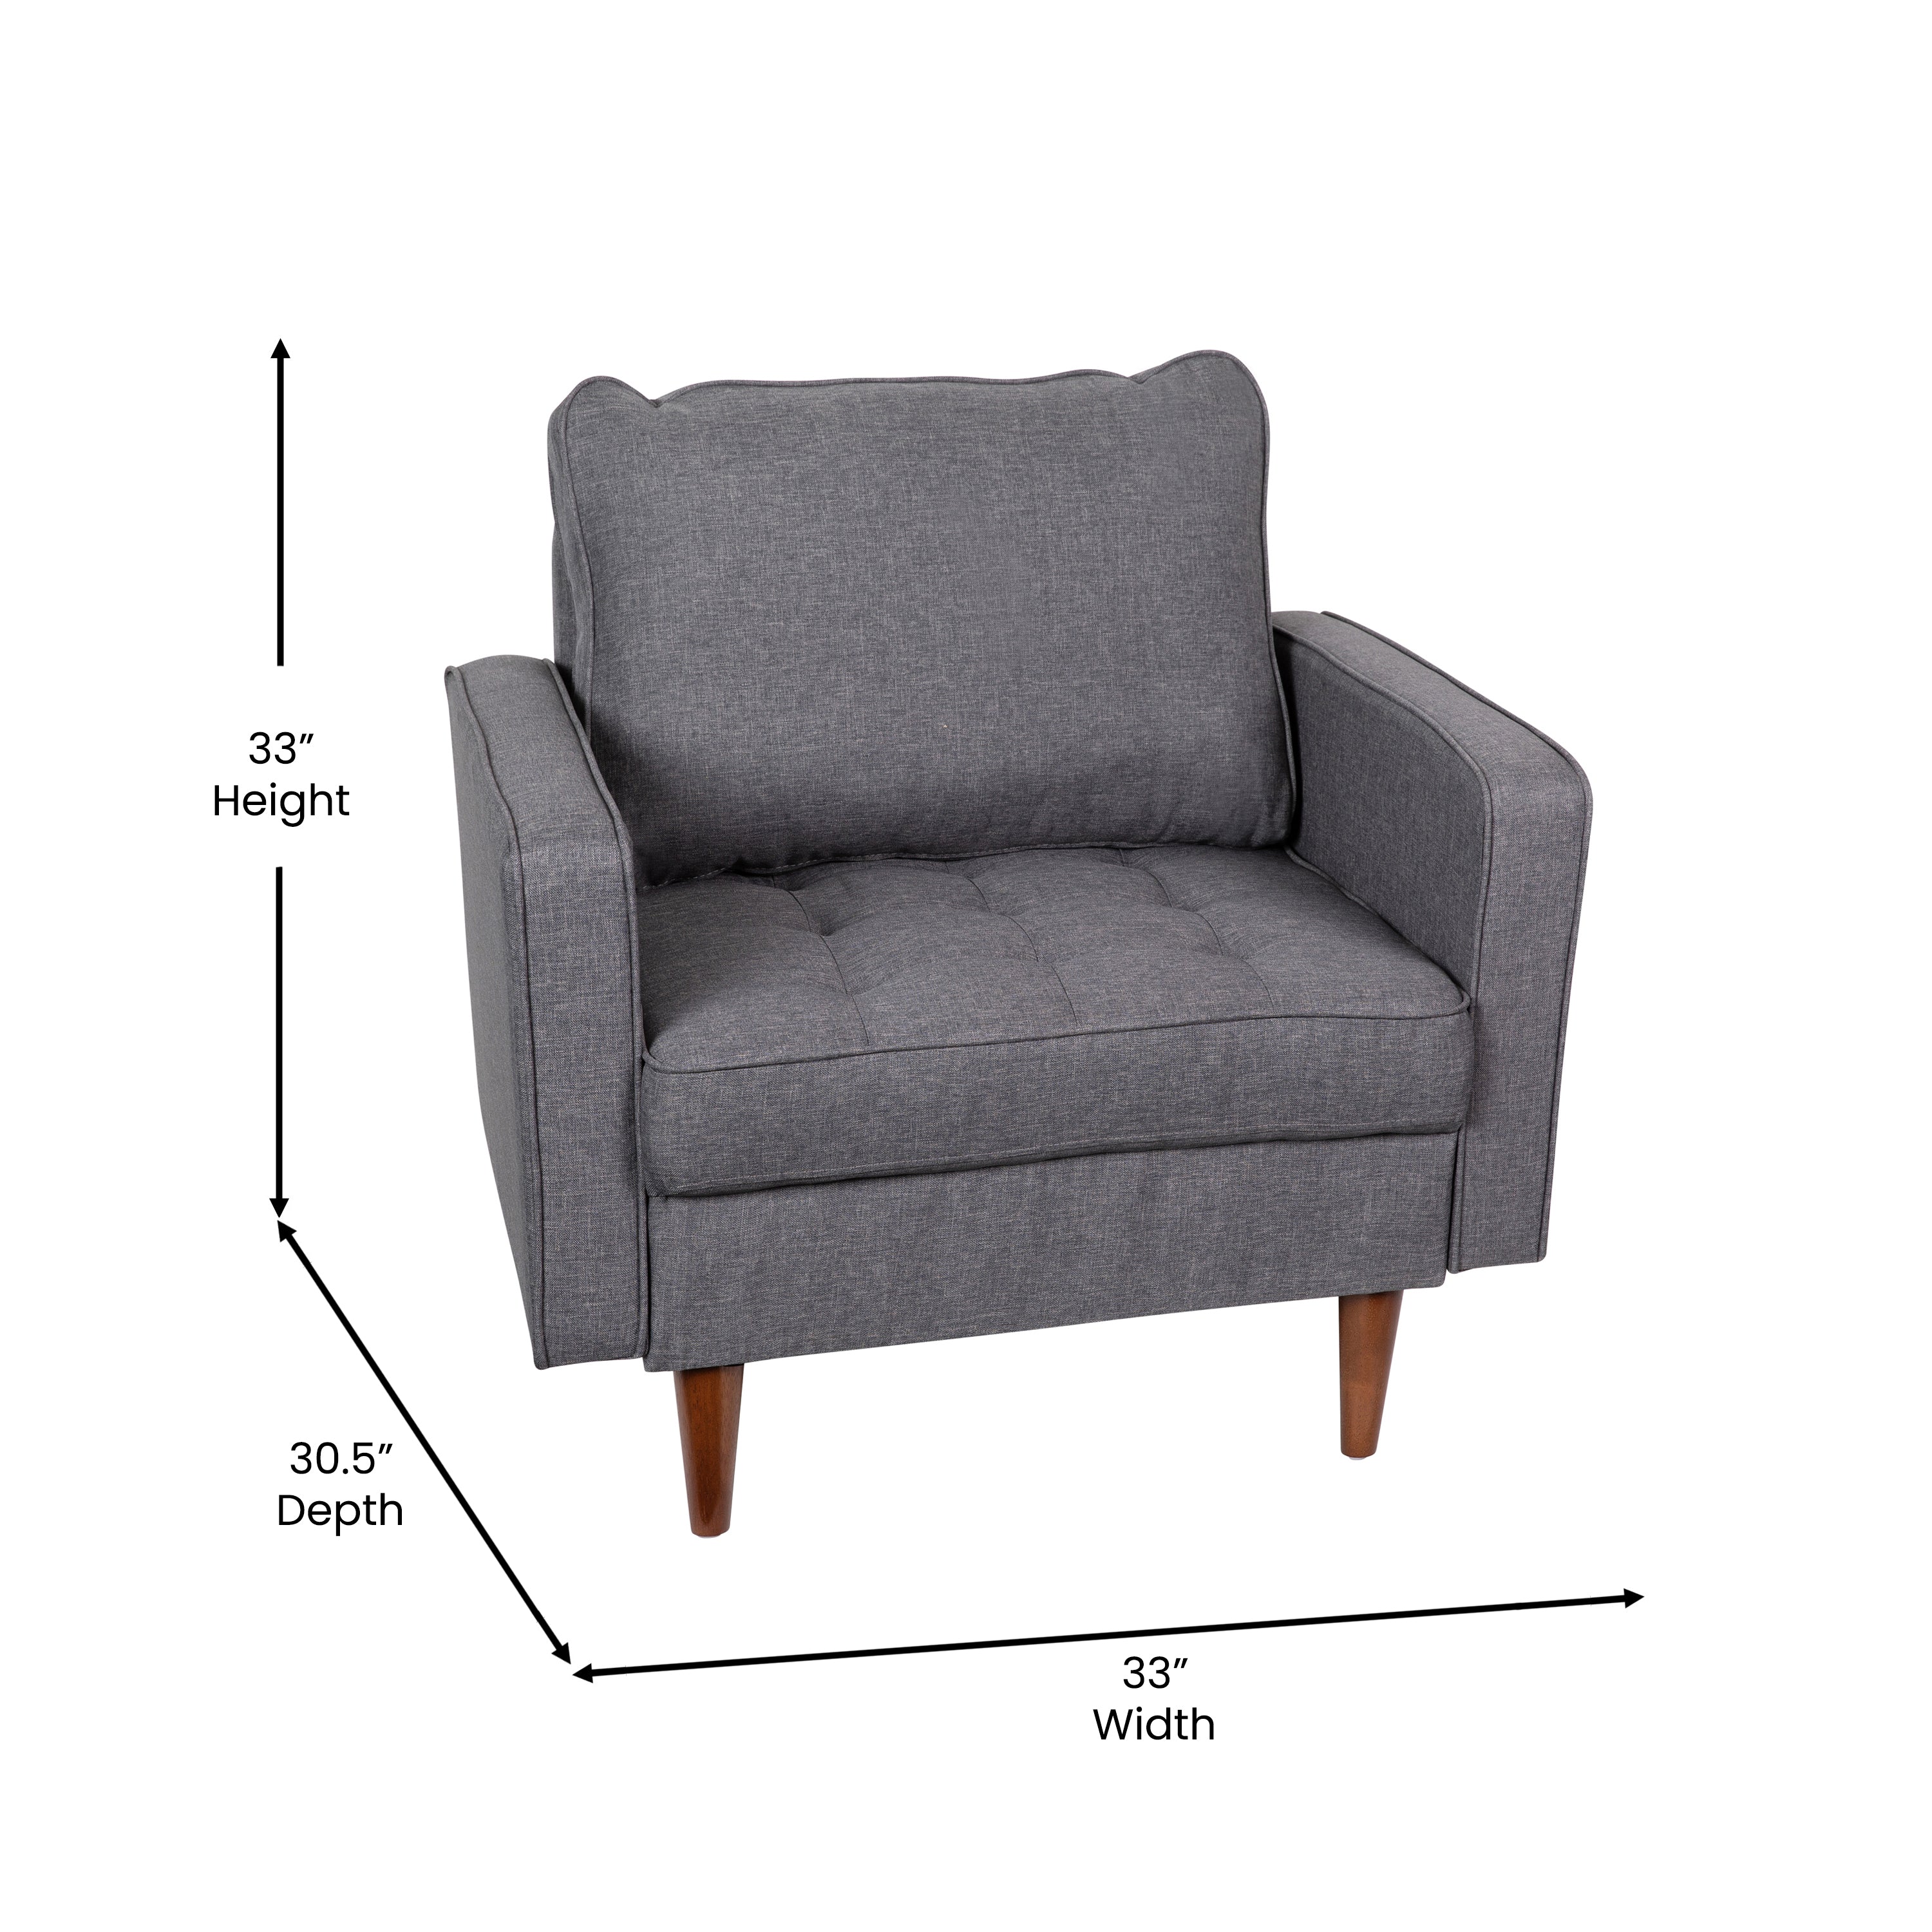 Hudson Mid-Century Modern Commercial Grade Armchair with Tufted Faux Linen Upholstery & Solid Wood Legs-Chair-Flash Furniture-Wall2Wall Furnishings